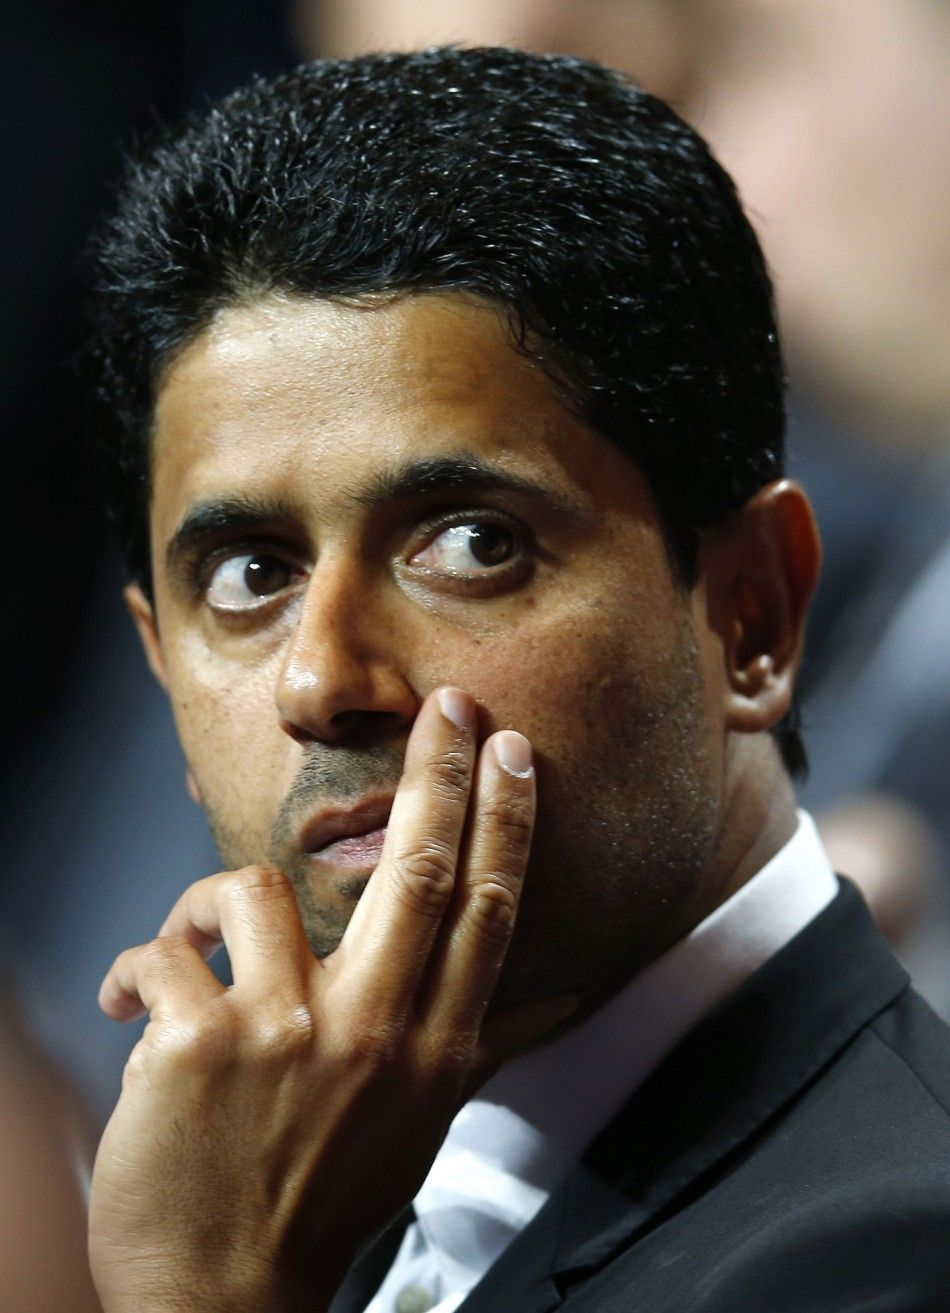 Paris St Germains club president Nasser al-Khelaif is seen during the draw ceremony for the 20142015 Champions League soccer competition at Monacos Grimaldi Forum in Monte Carlo August 28, 2014. 